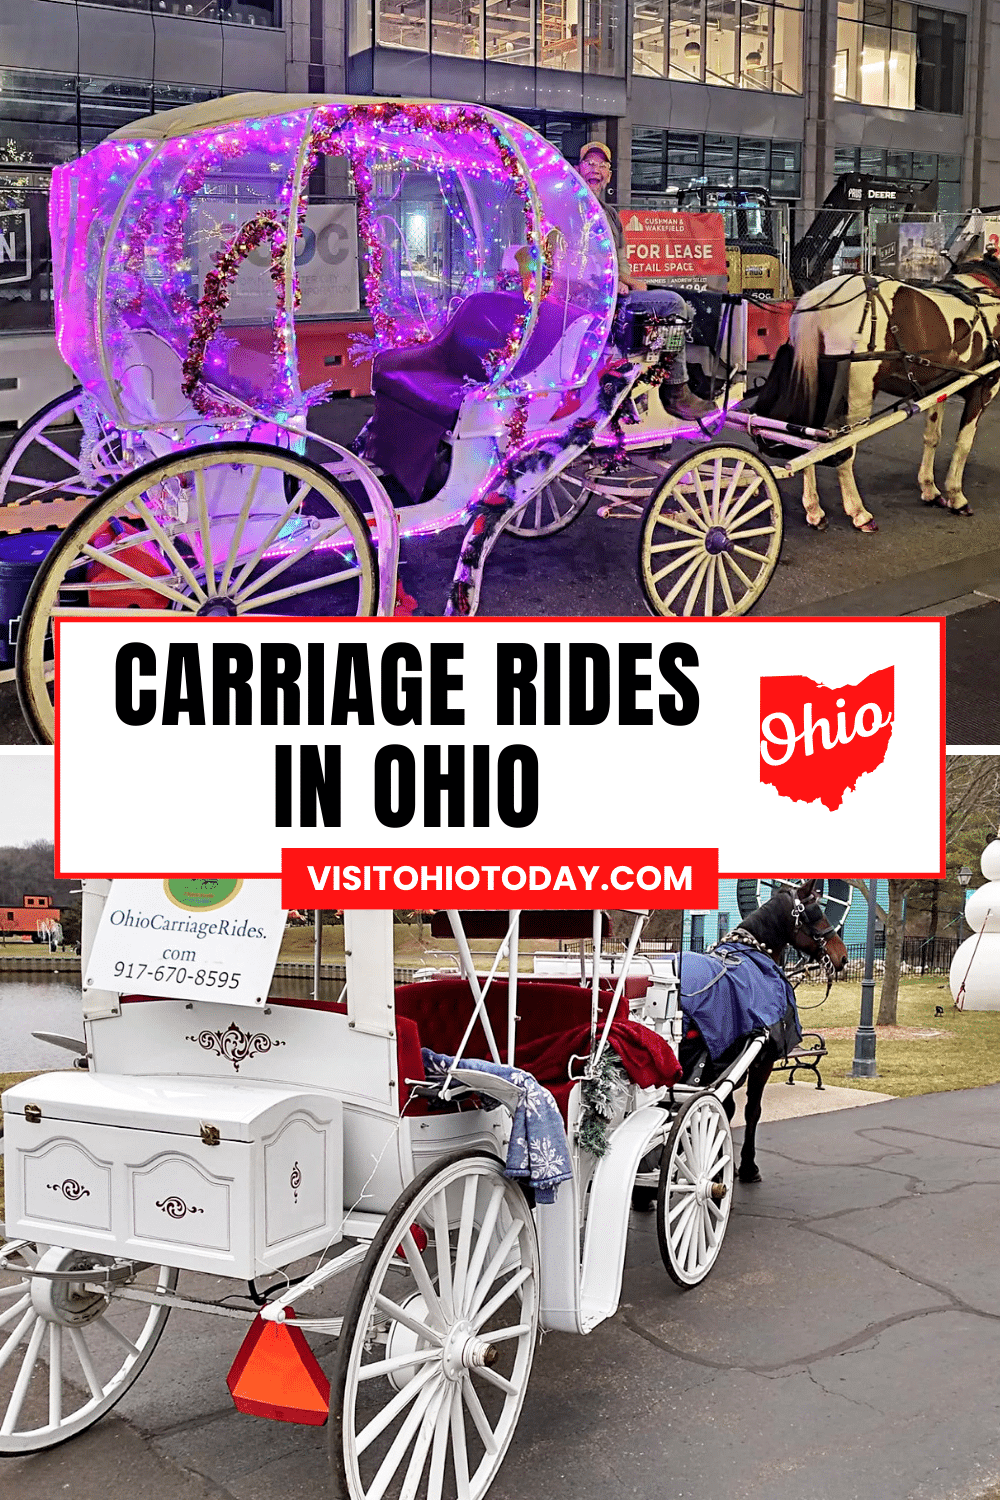 Carriage rides in Ohio, along with Sleigh rides are a memorable way of seeing the towns, cities and countryside of Ohio. These types of rides always create lasting memories.